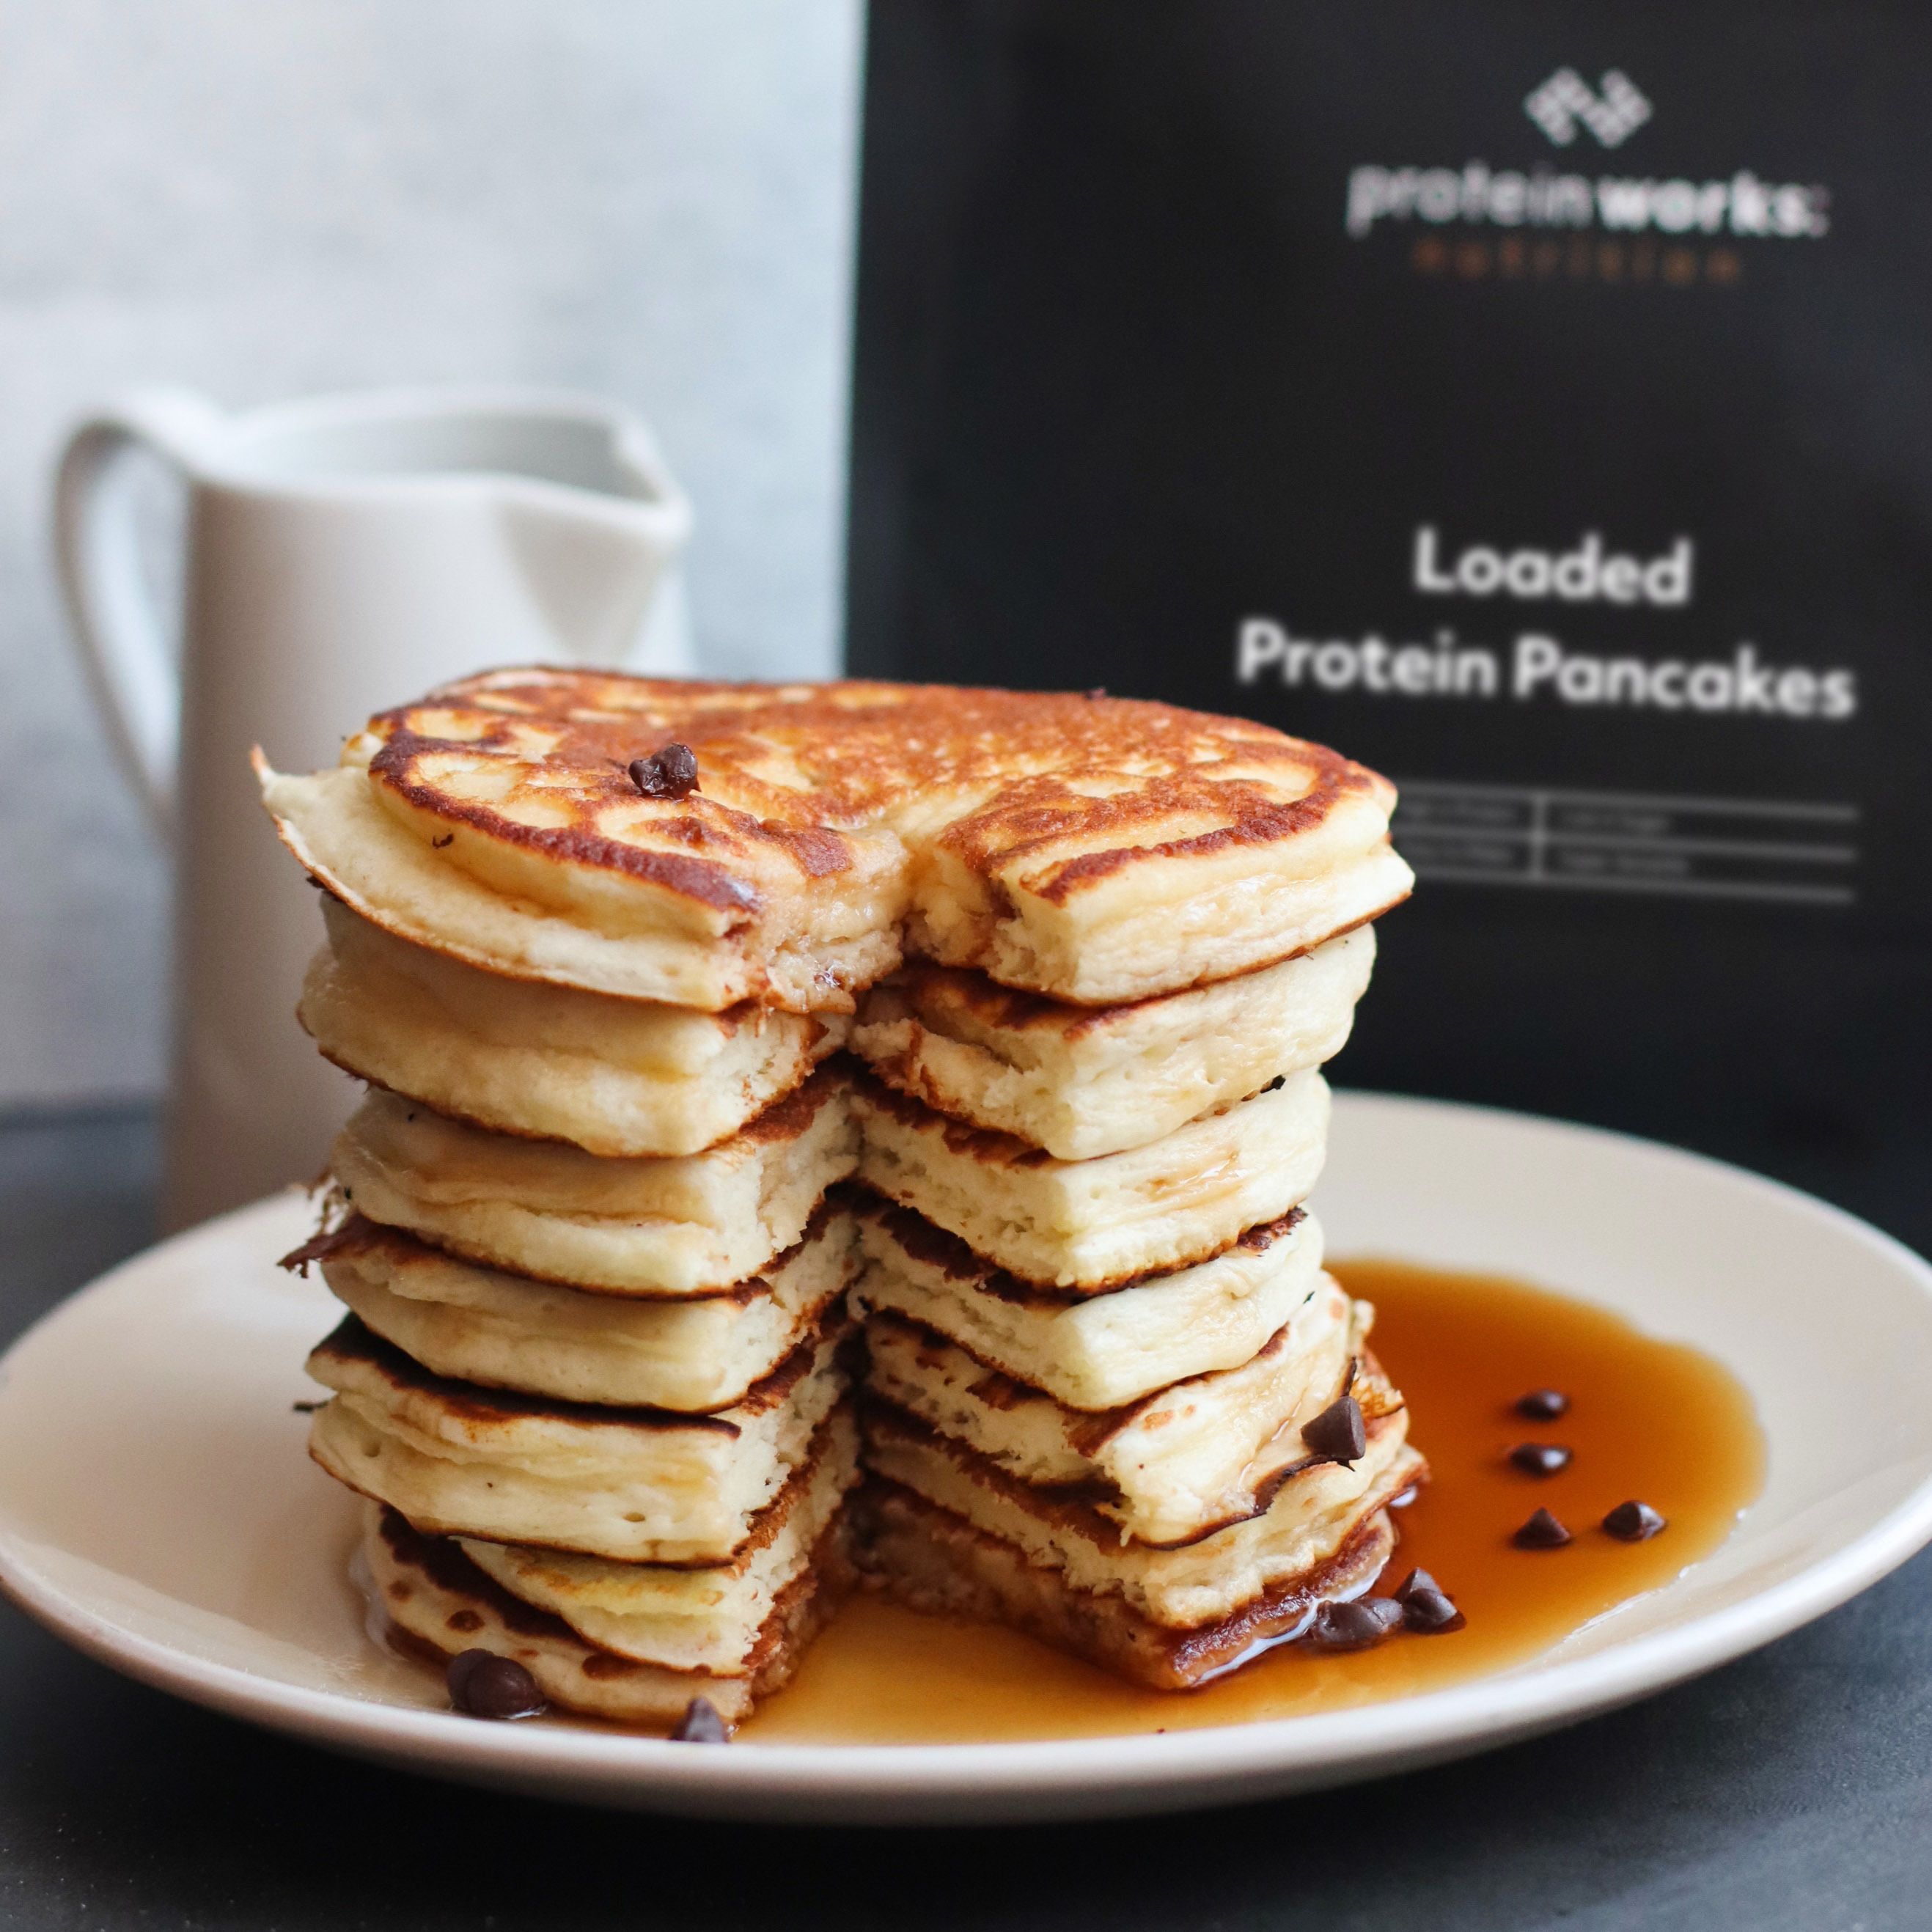 Loaded Protein Pancakes